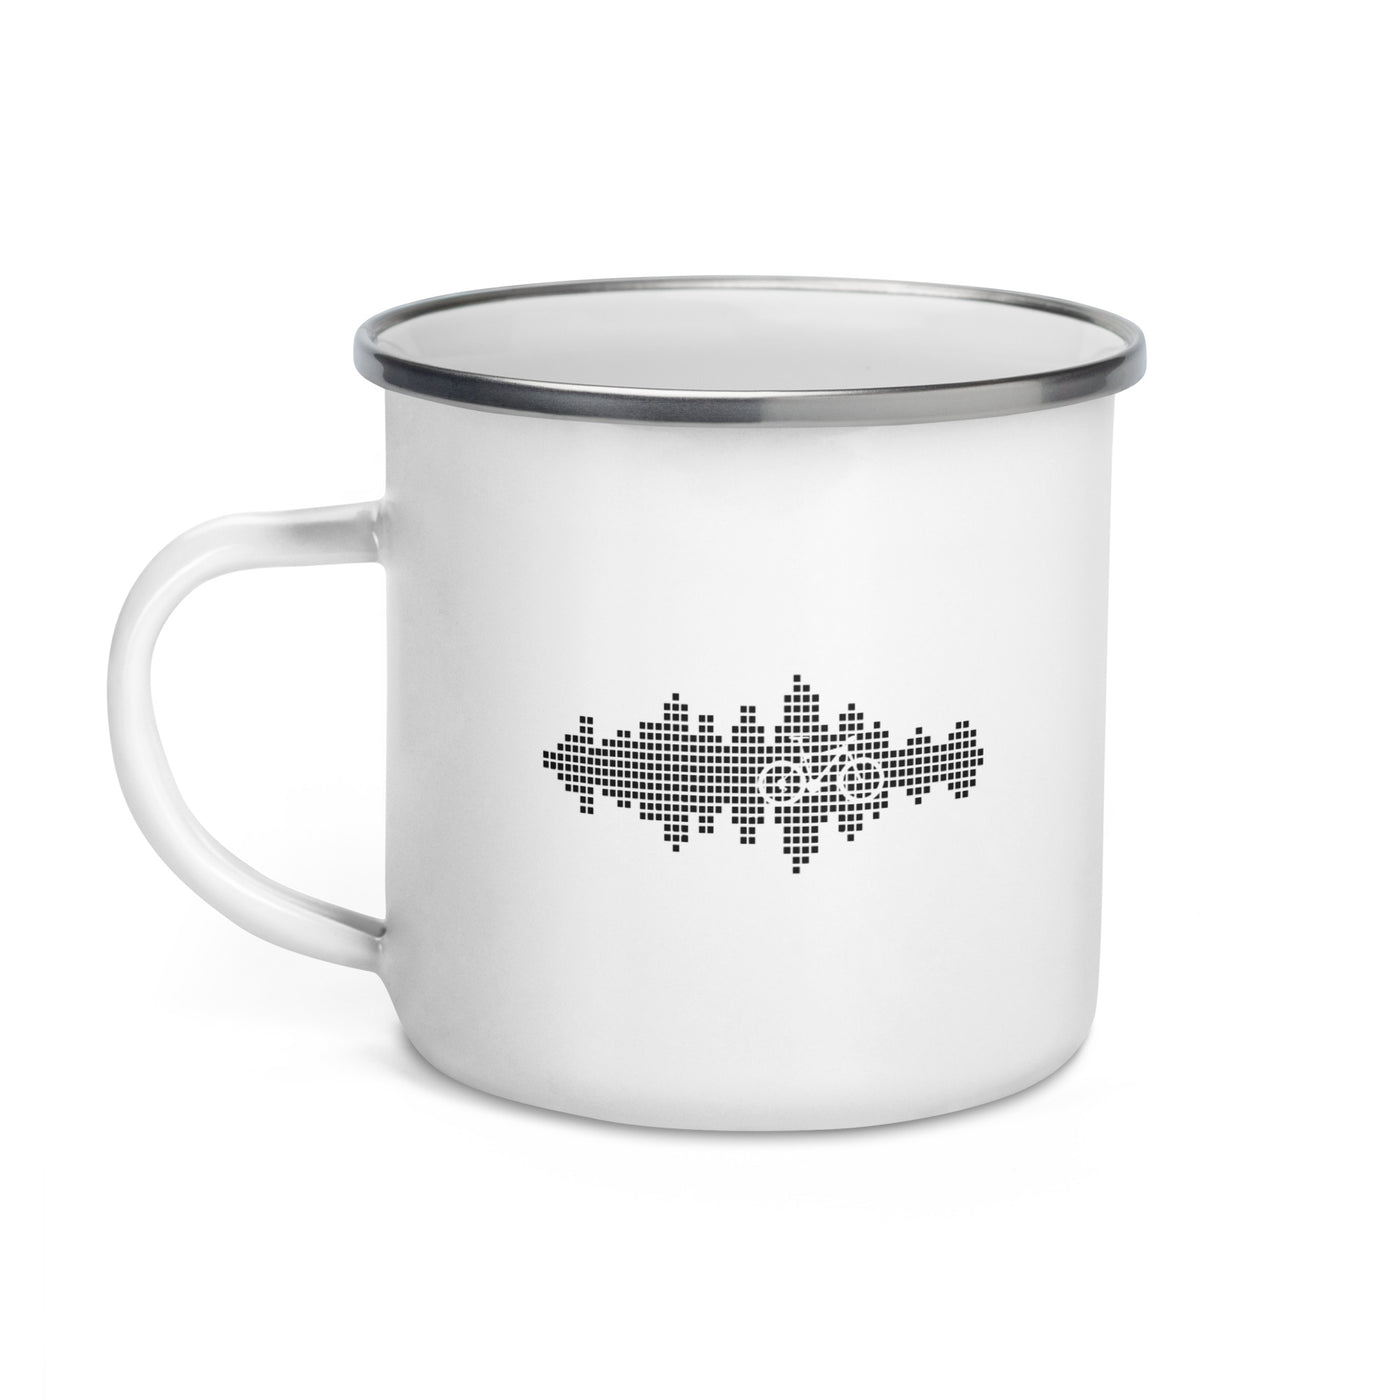 Sound Waves - Cycling - Emaille Tasse fahrrad